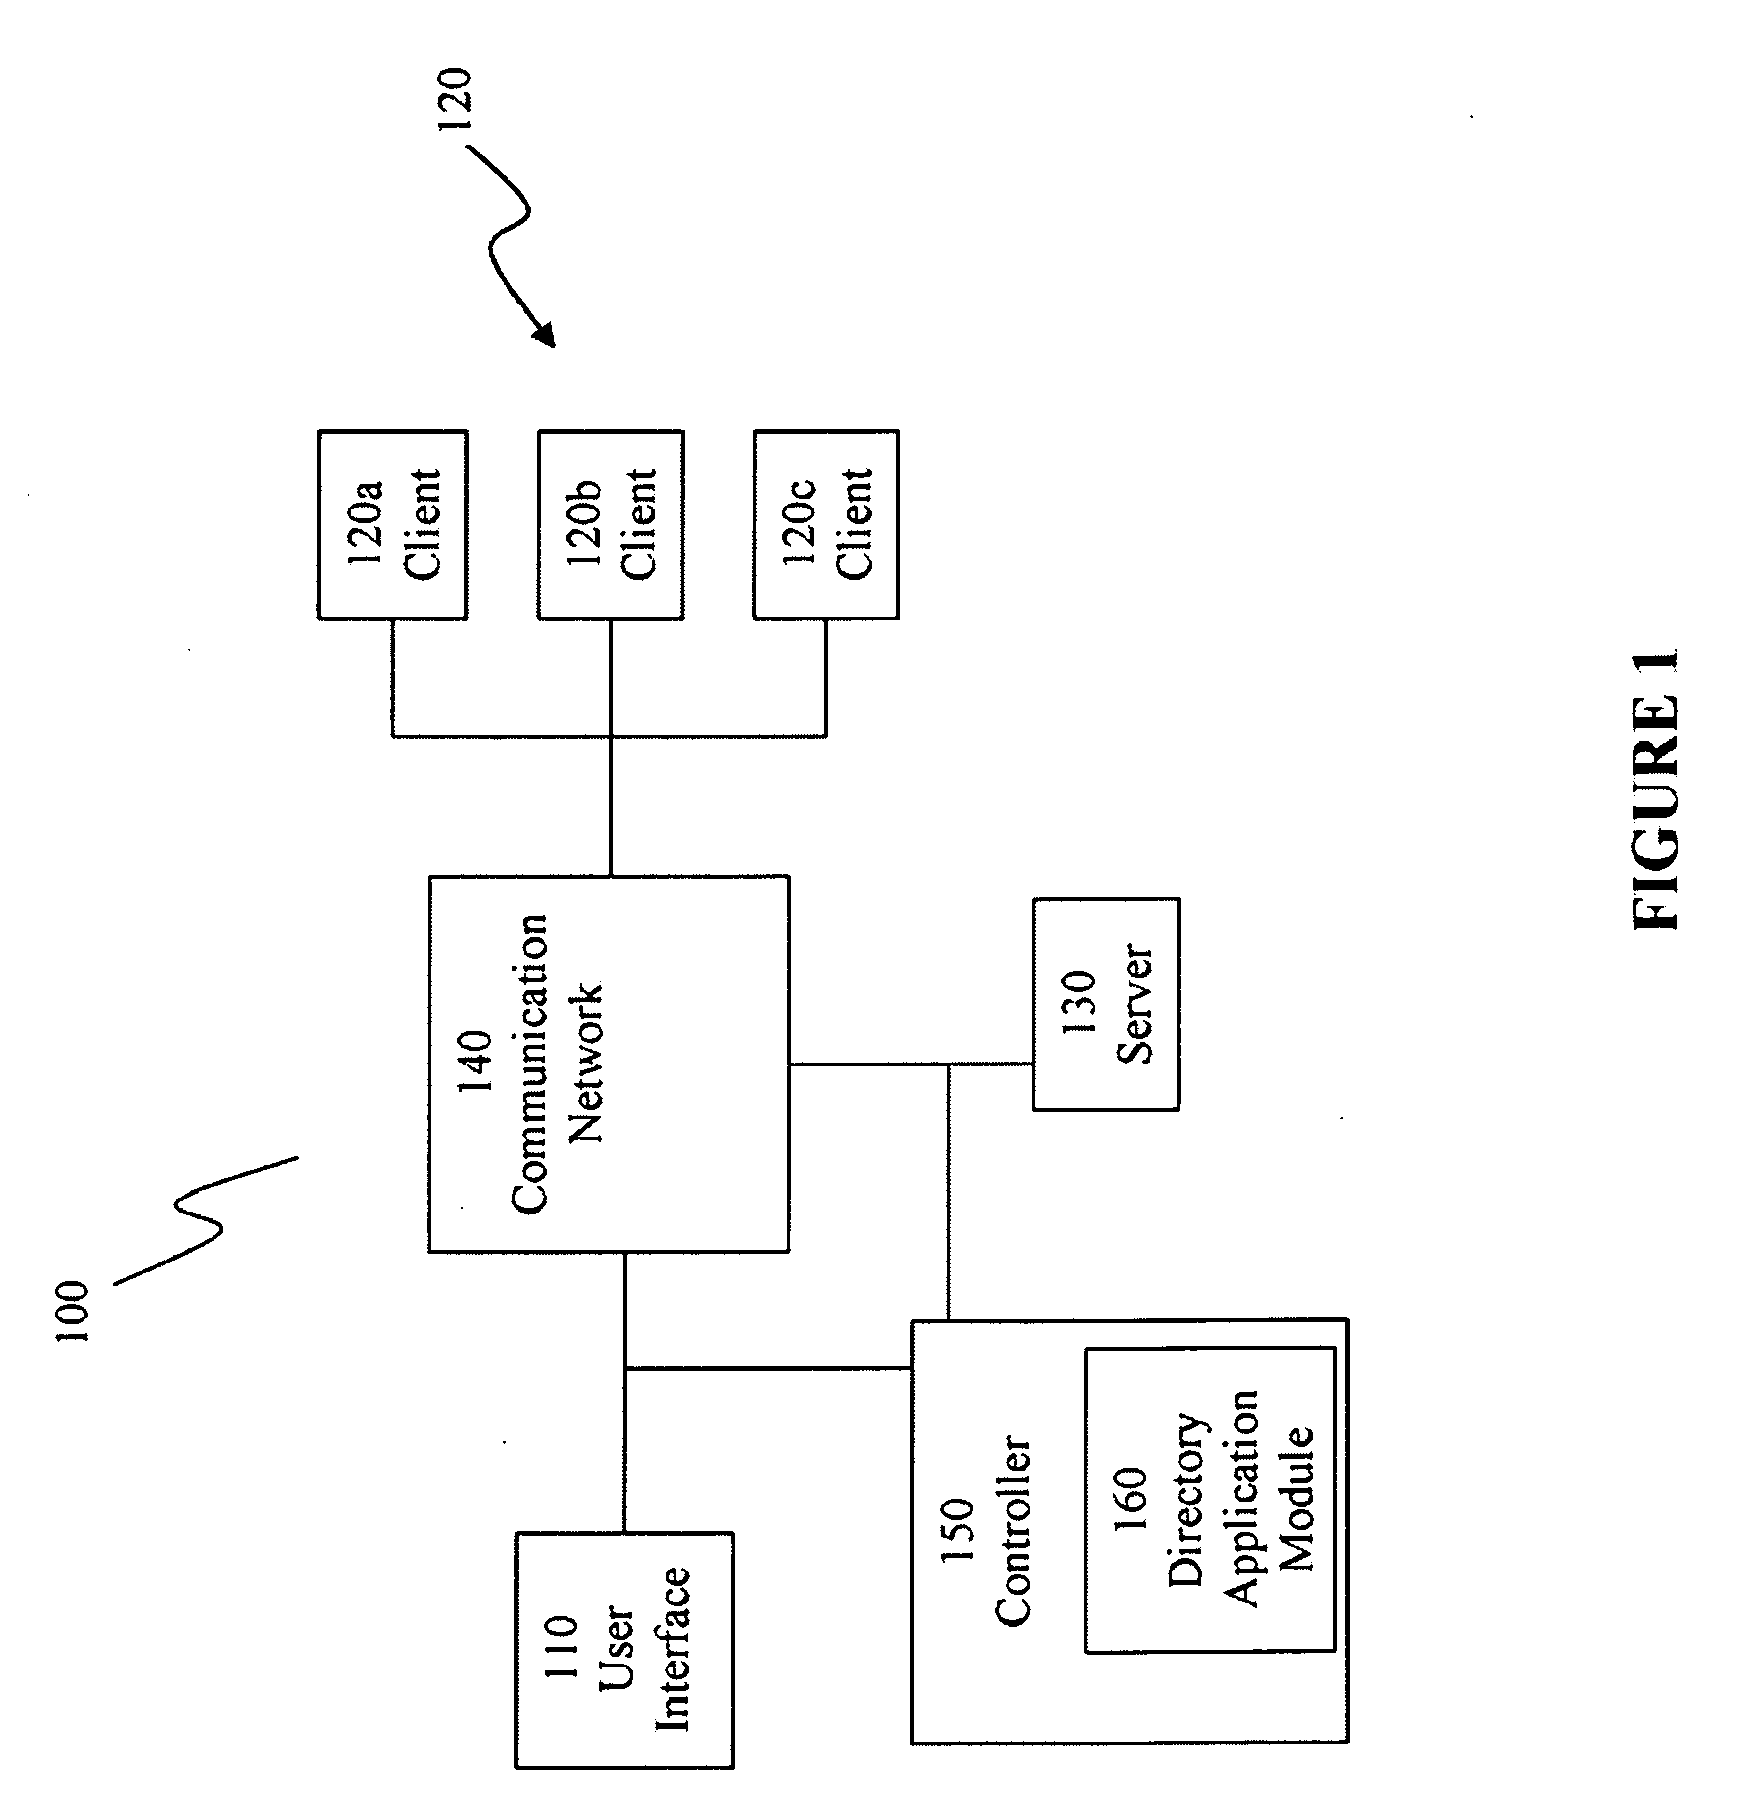 Methods and apparatus for interactive automated receptionist